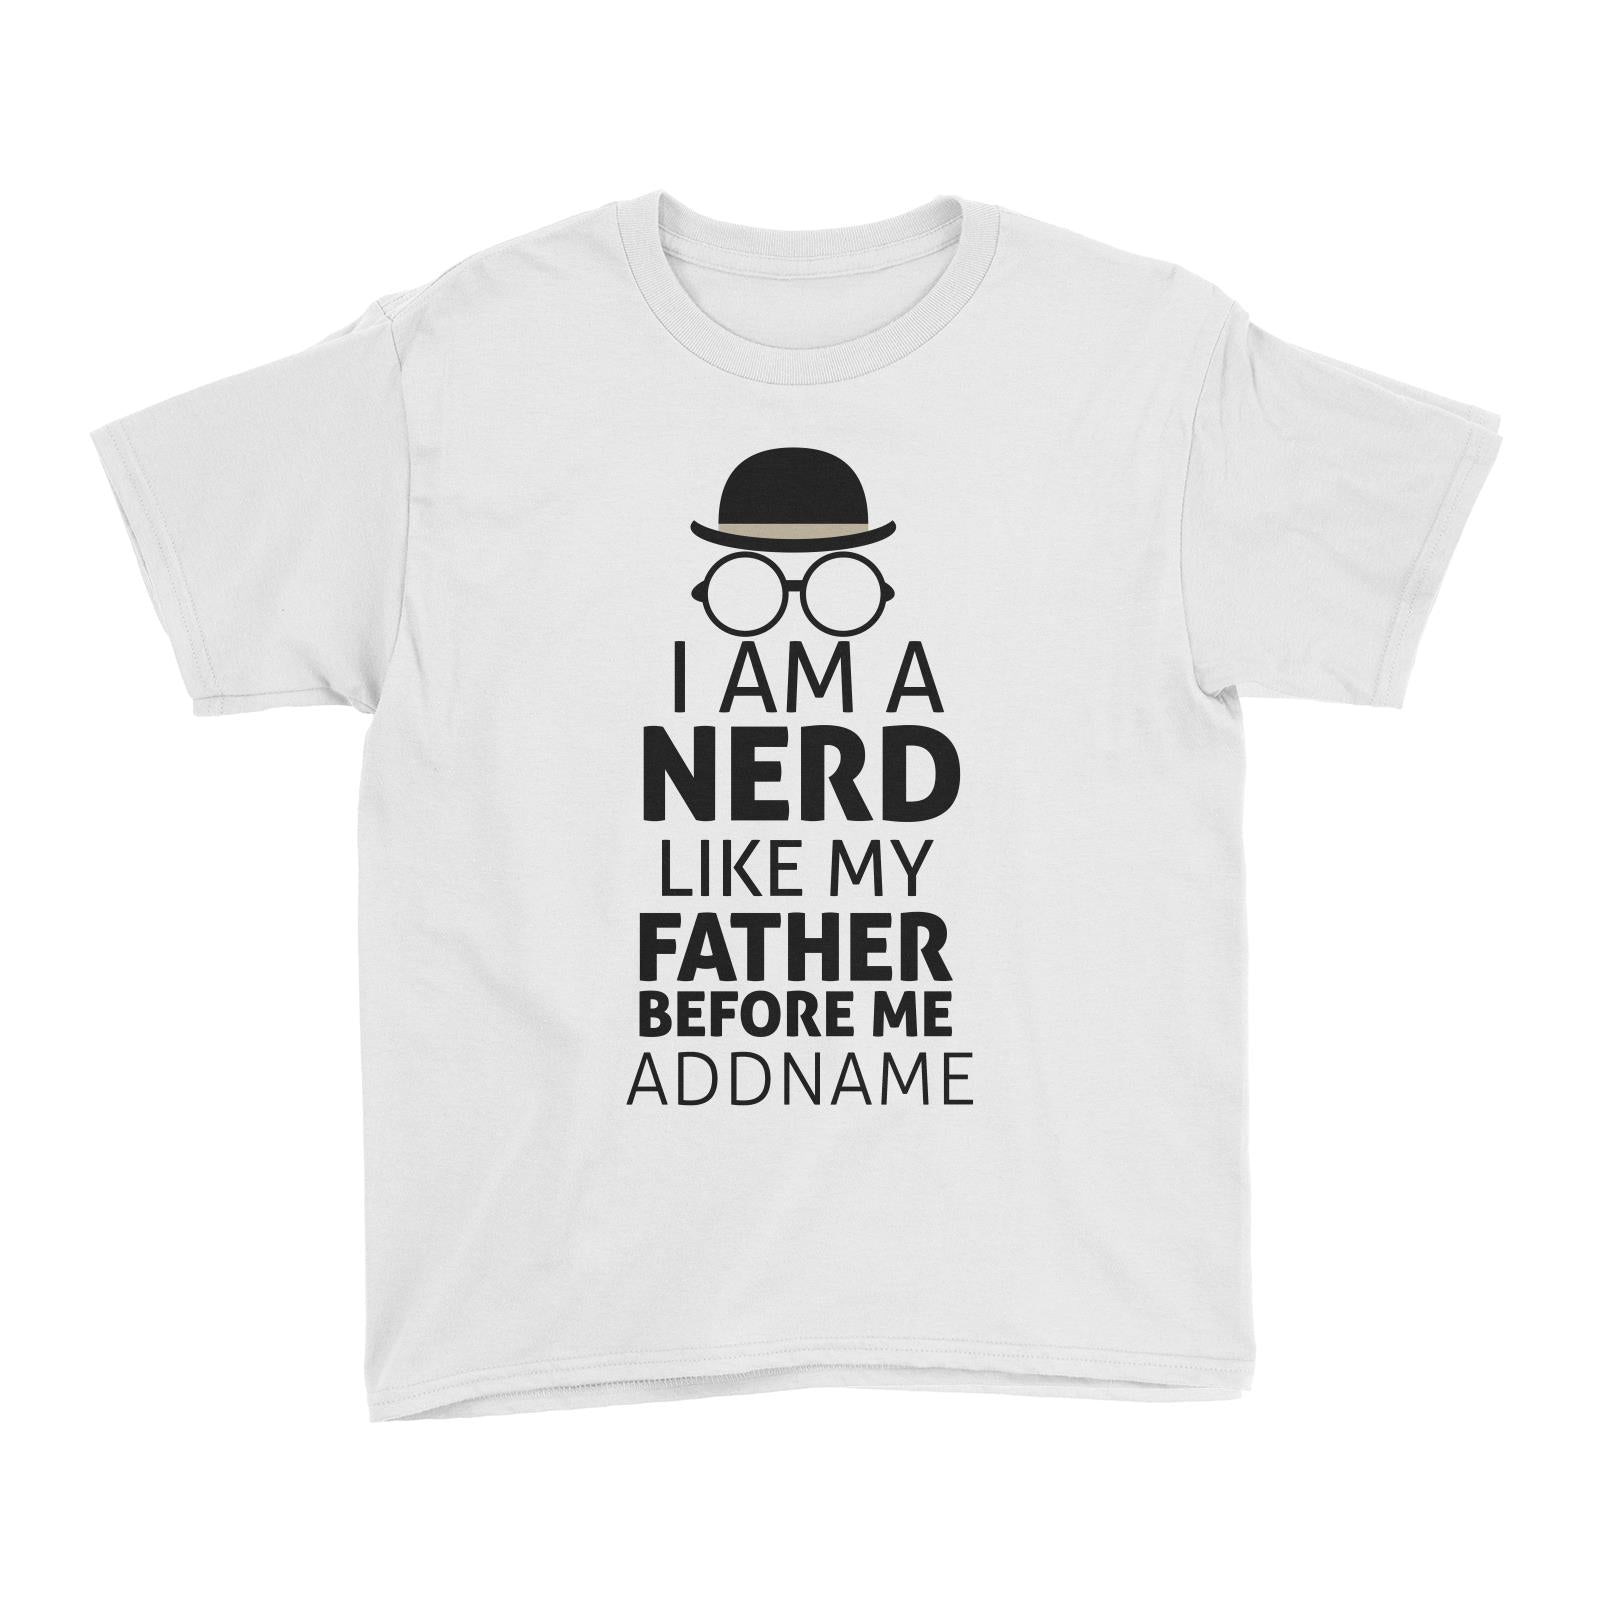 I Am A Nerd Like My Father Before Me With Glasses Kid's T-Shirt